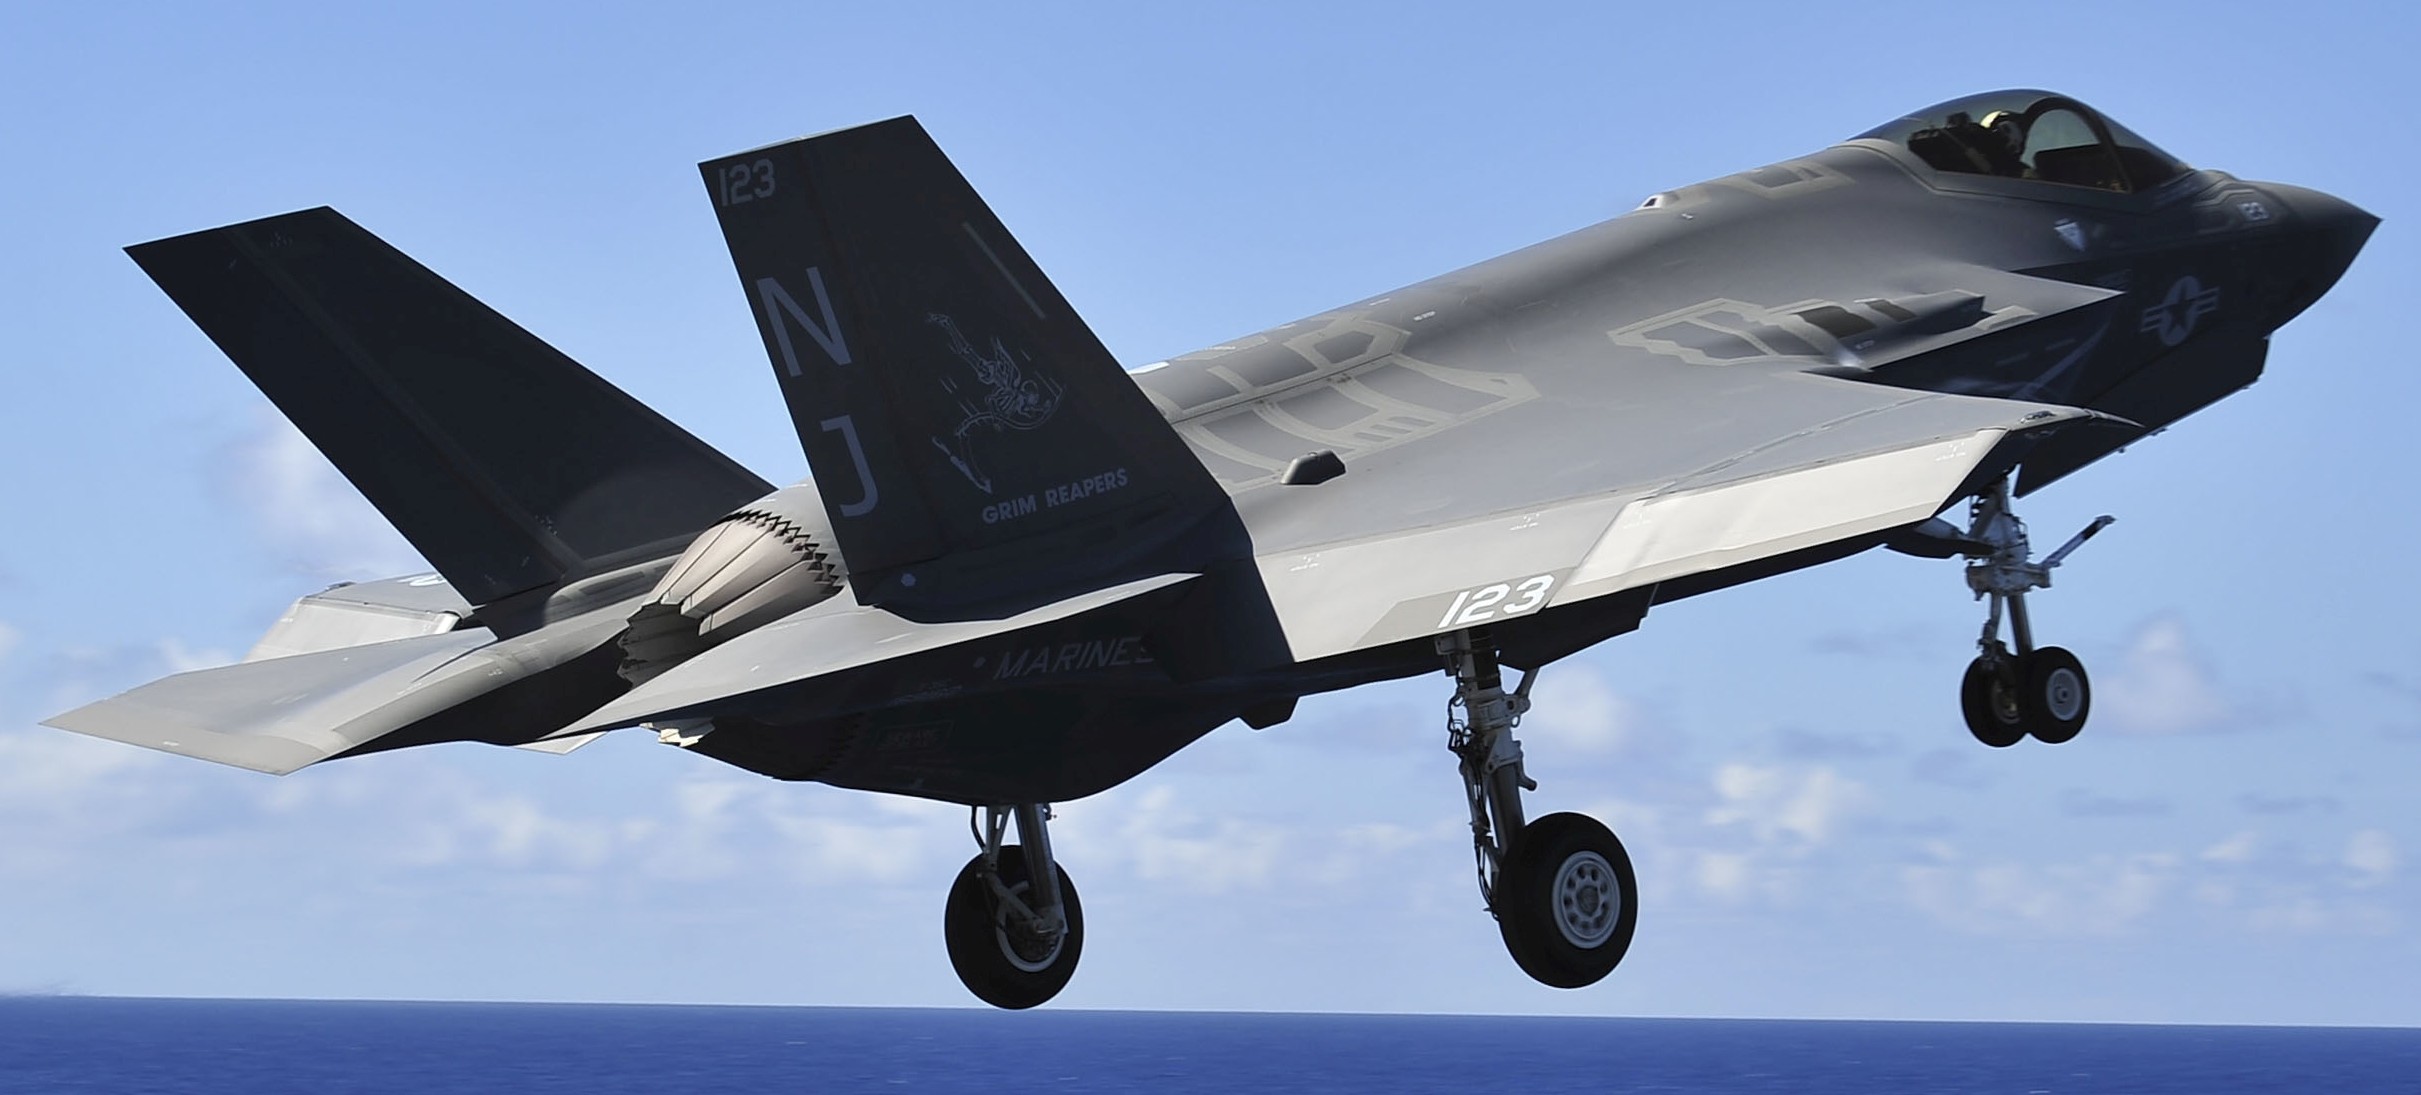 vfa-101 grim reapers strike fighter squadron us navy f-35c lightning jsf frs 12